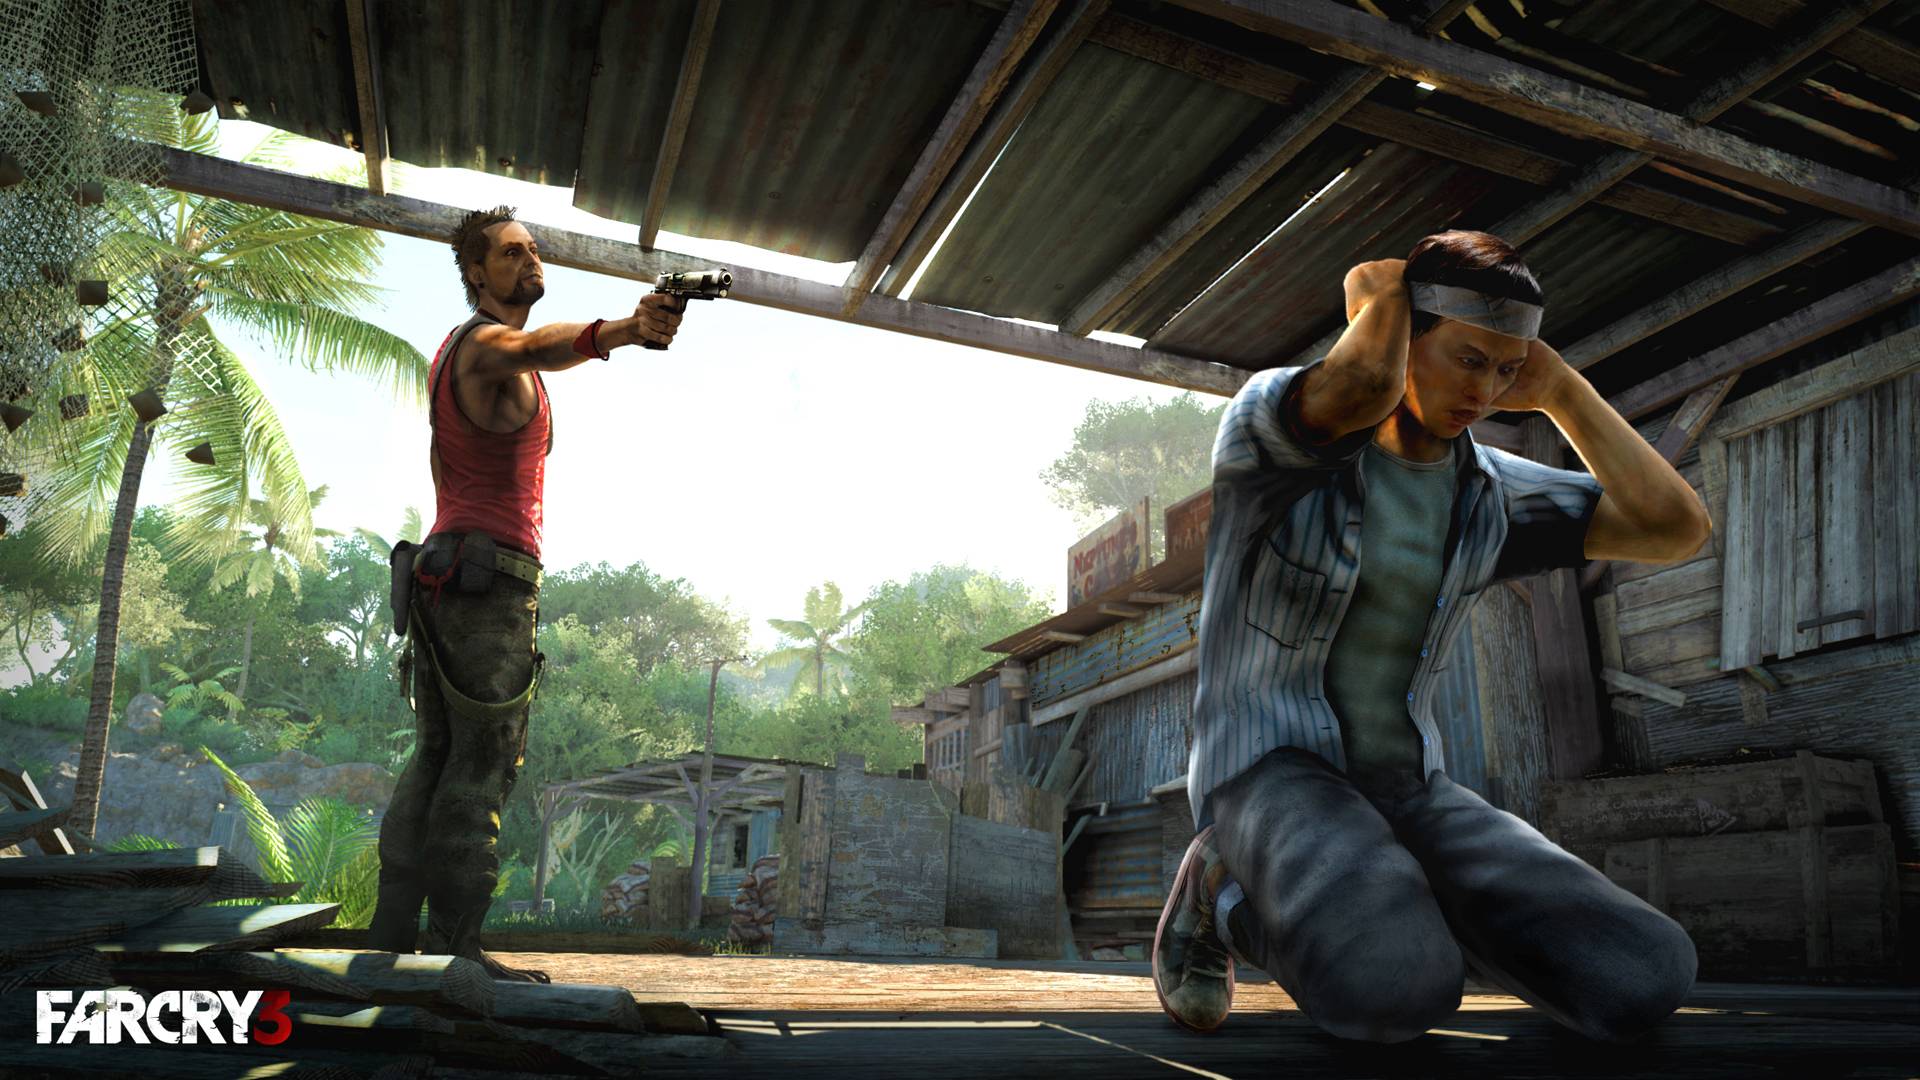 Far Cry 3 Computer Wallpapers Desktop Backgrounds 1920x1080 ID 1920x1080